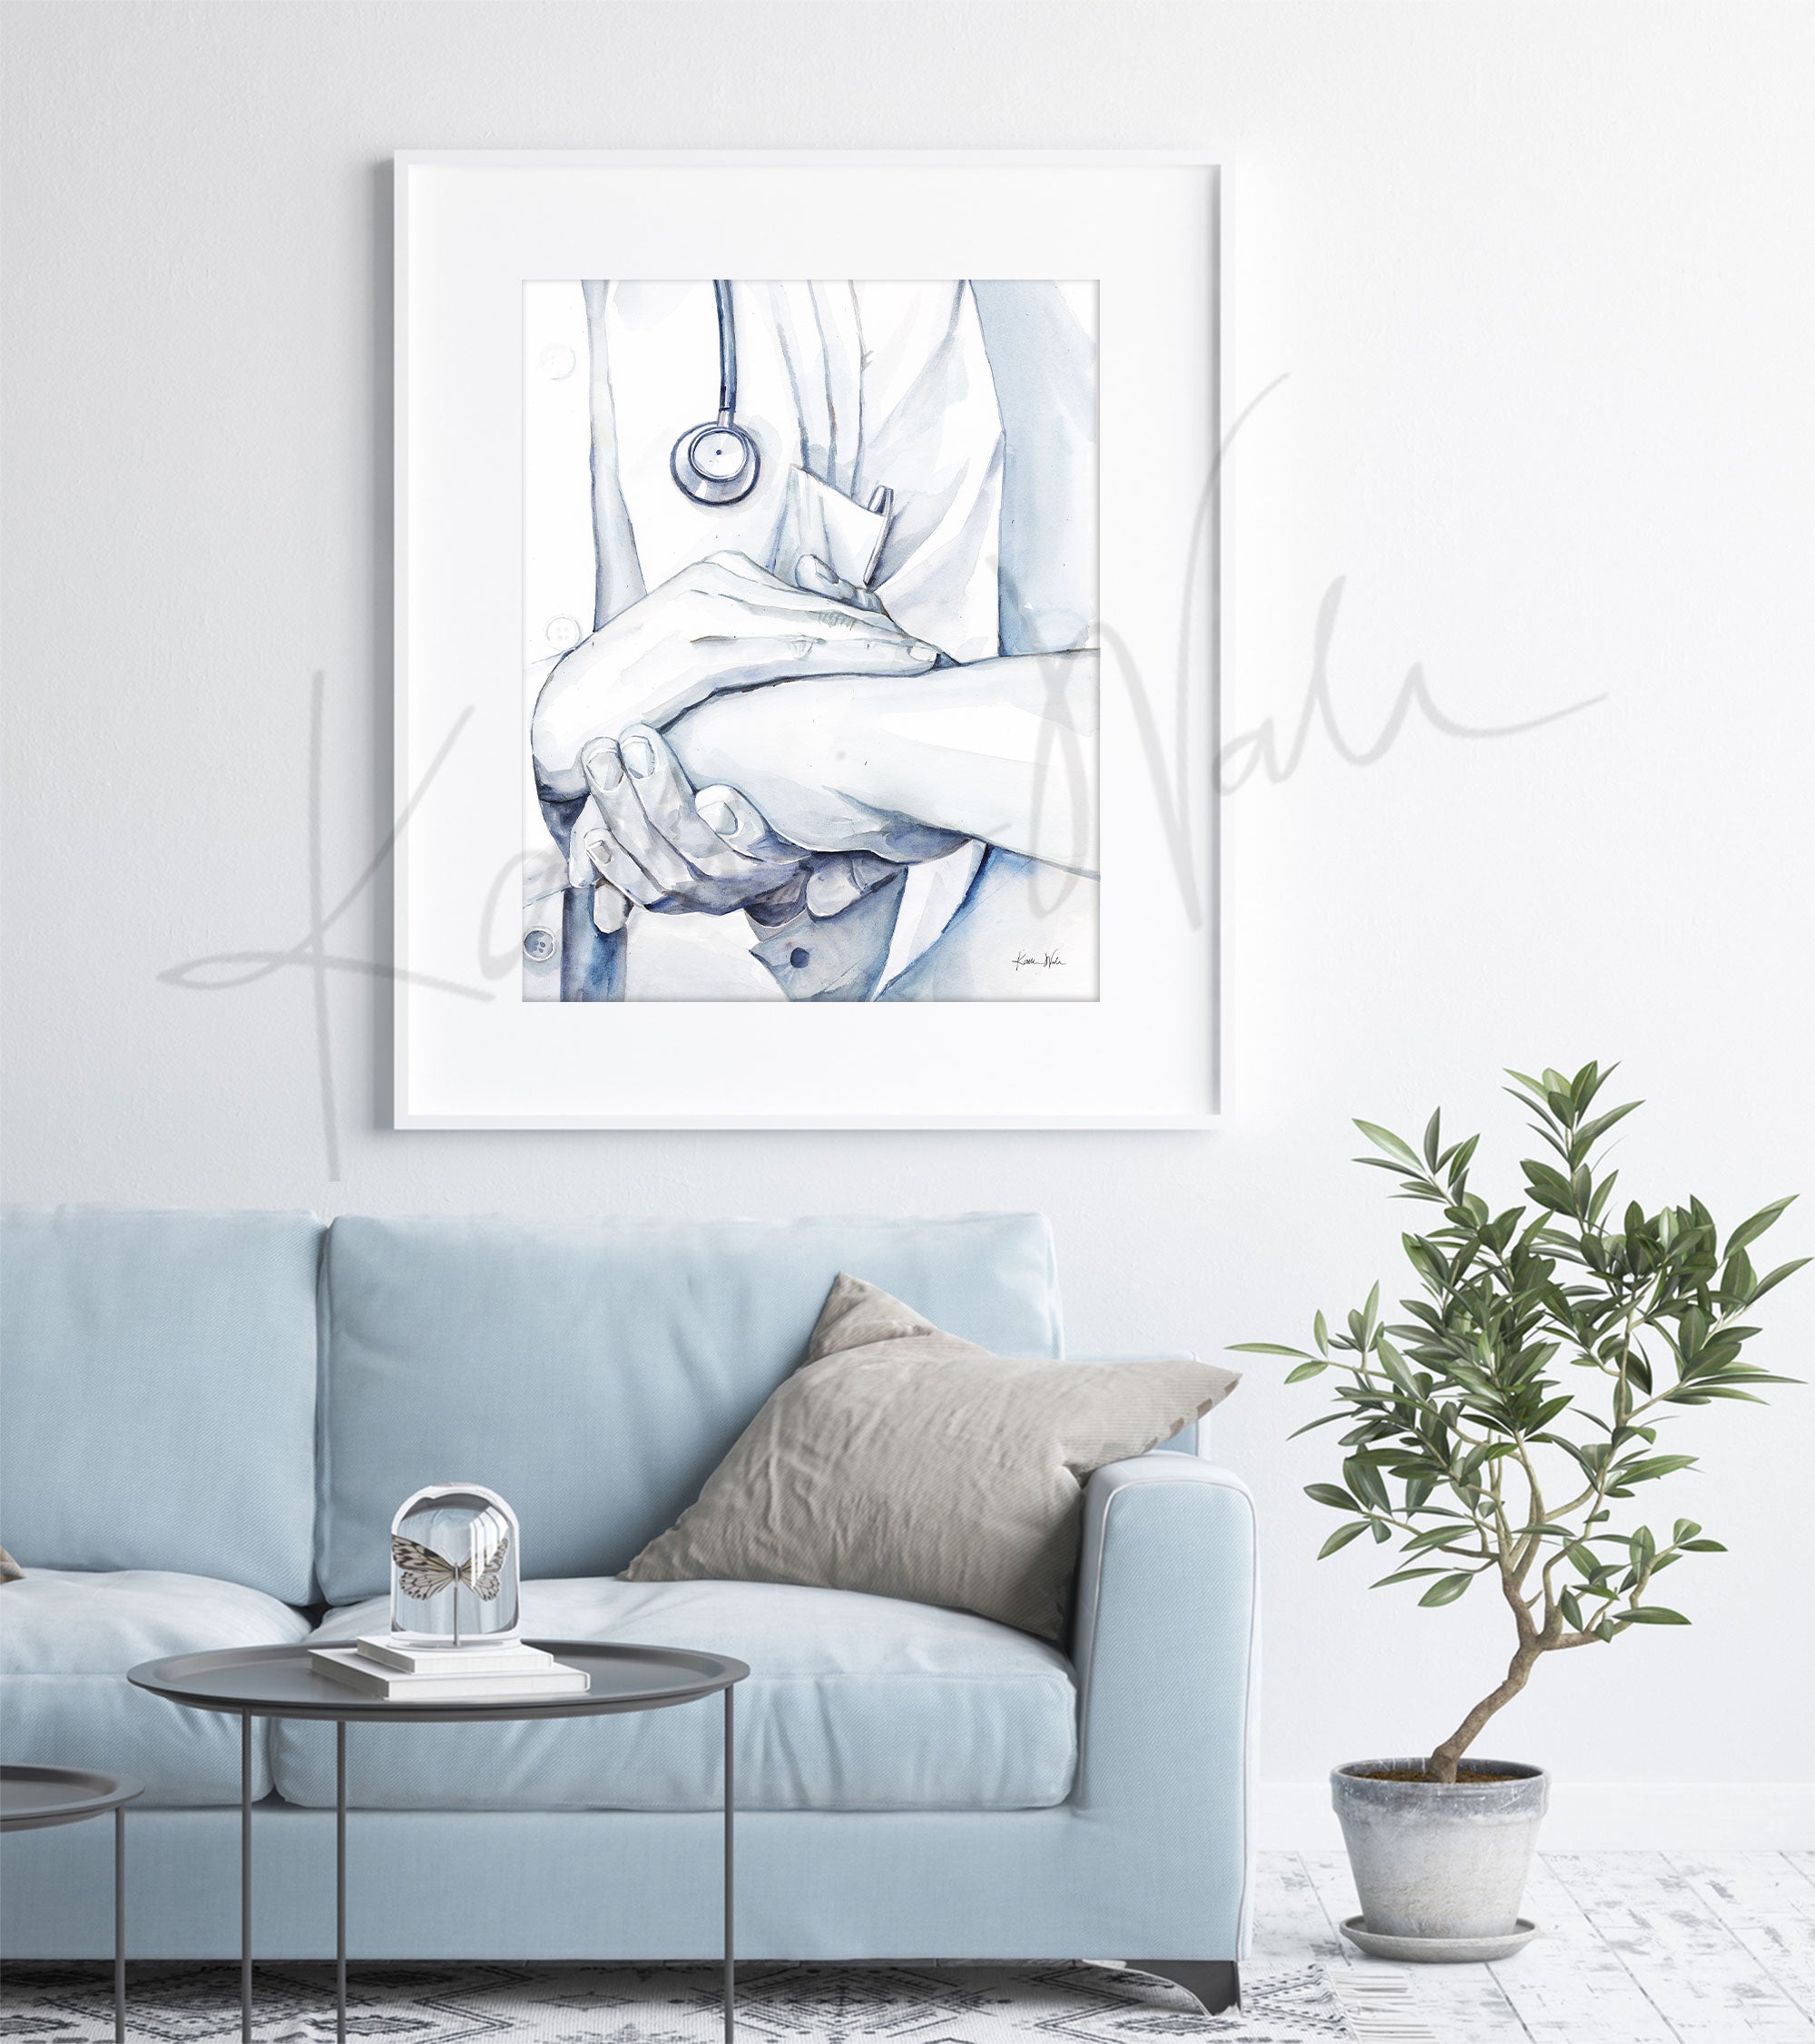 Framed watercolor painting of a doctor holding a patient’s hand in comfort. The painting is hanging over a blue couch